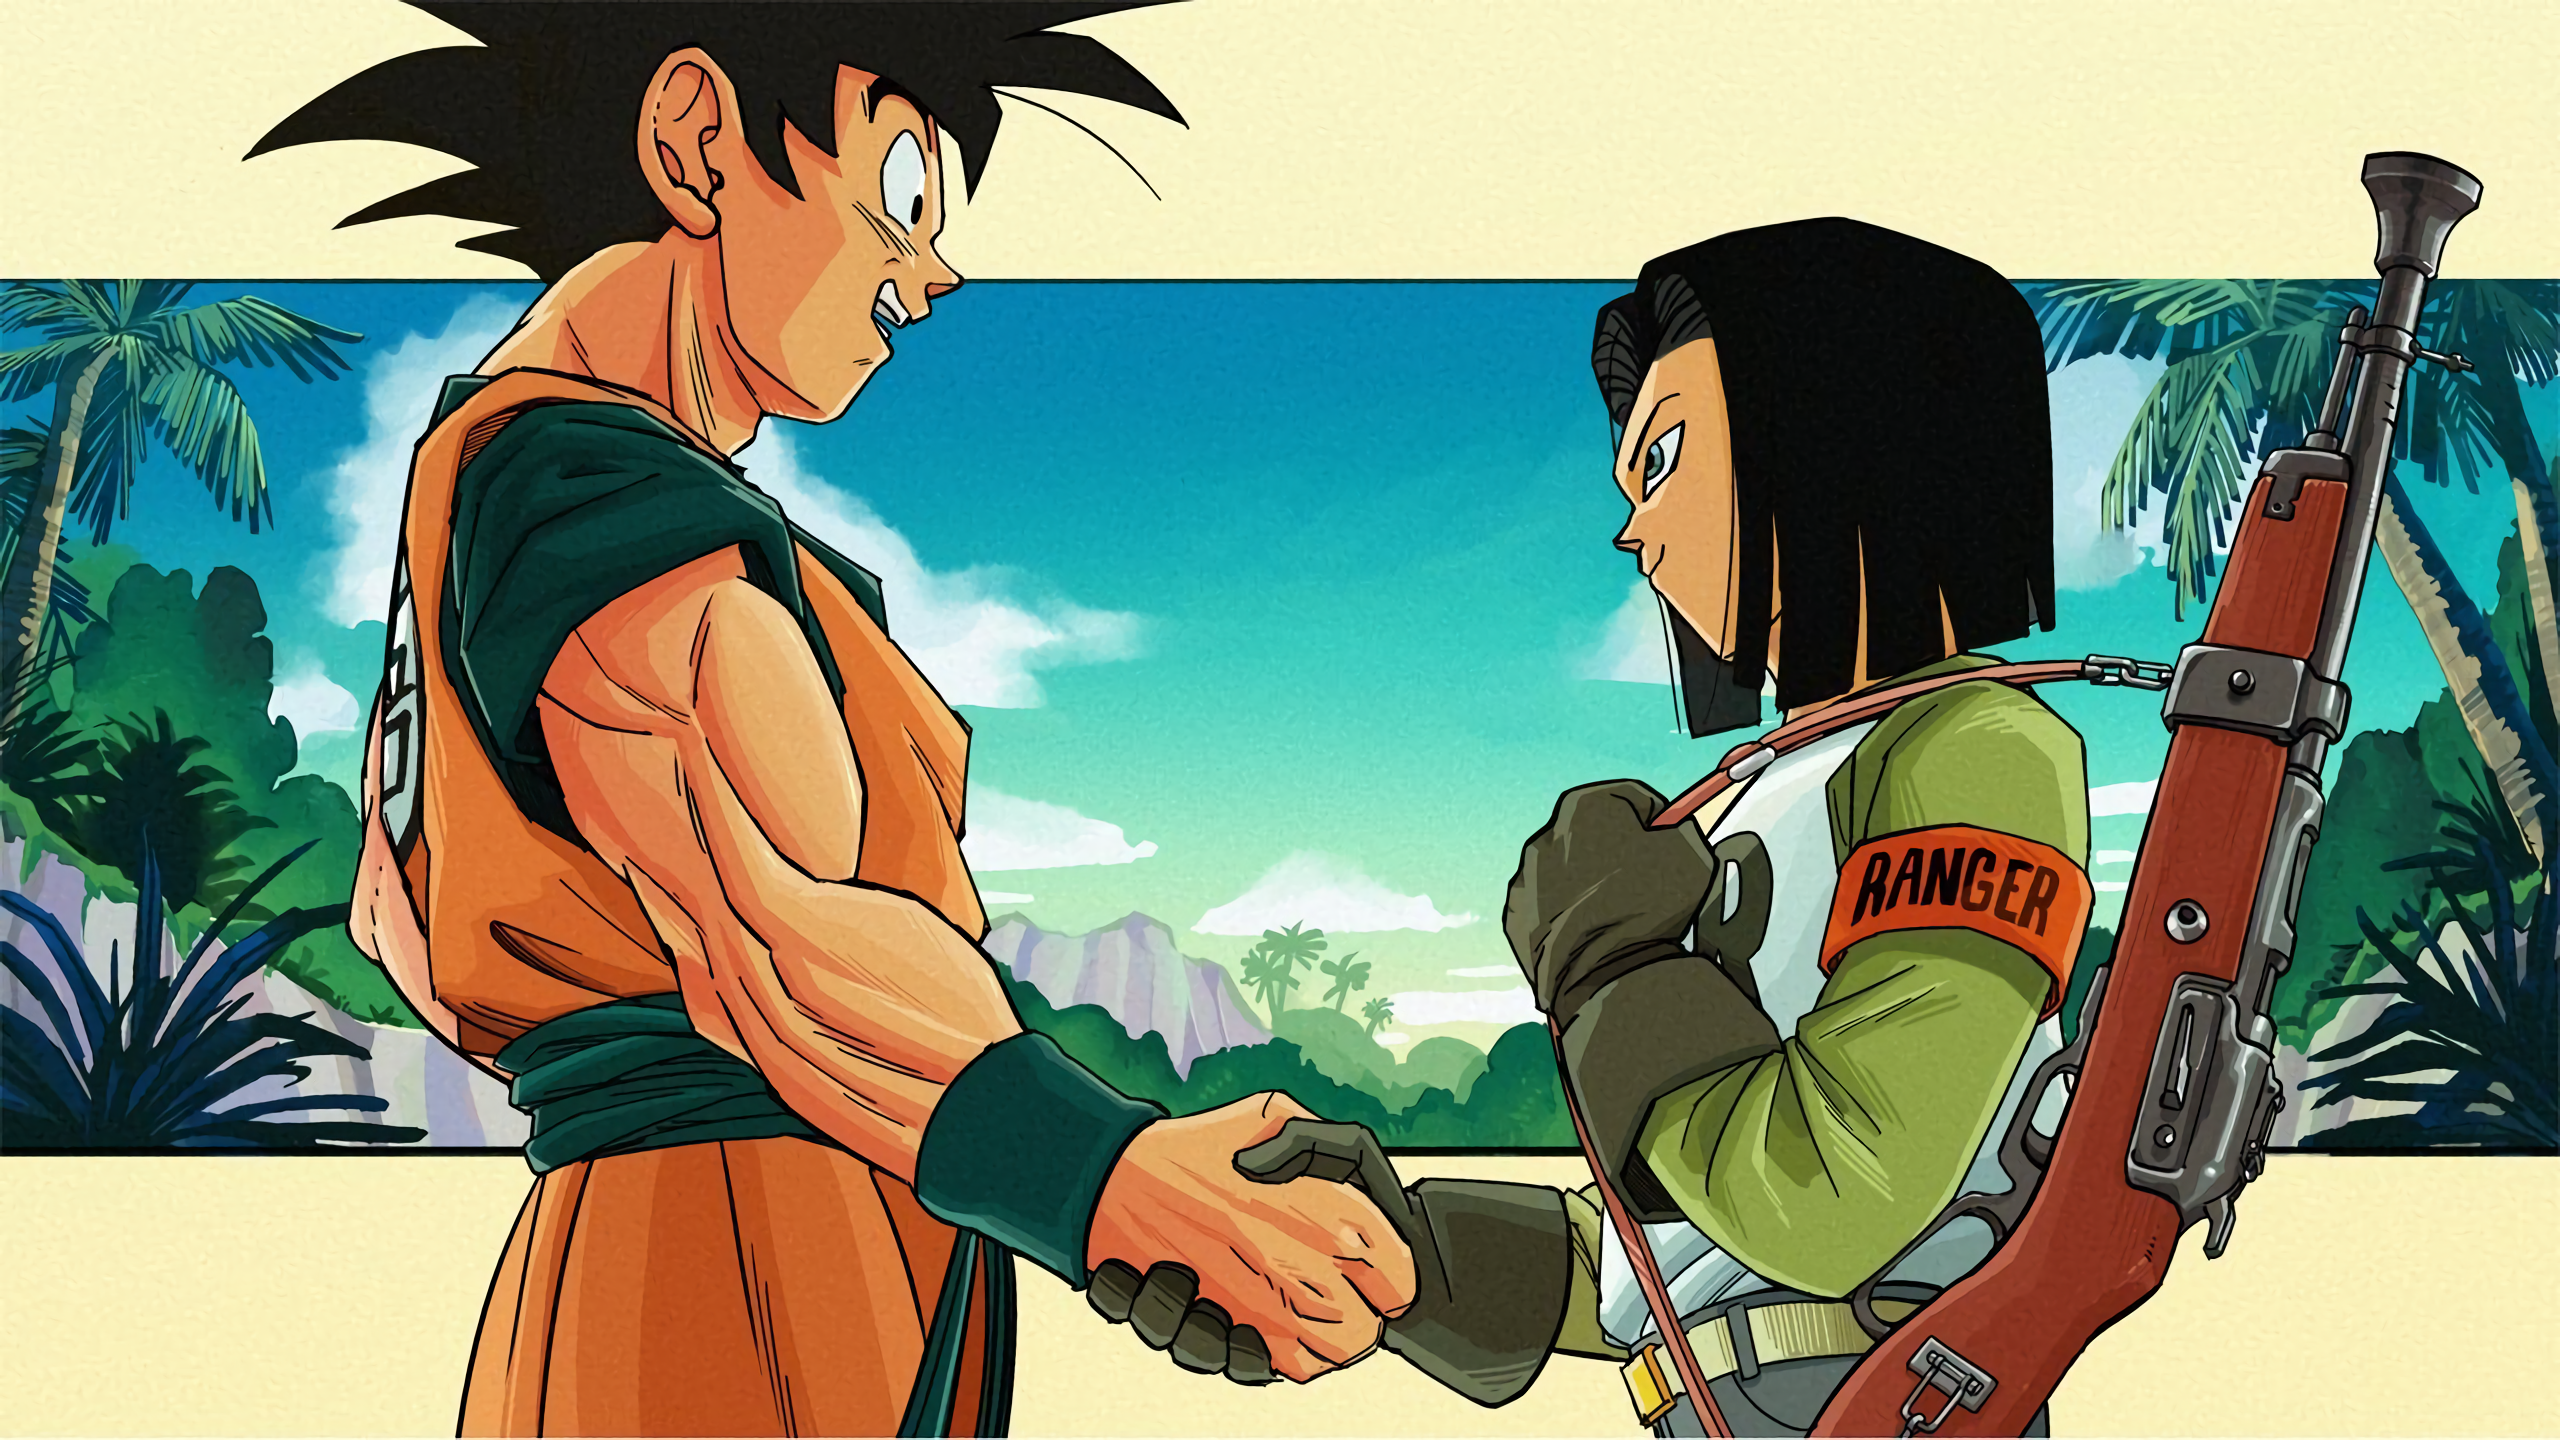 Android 17 Fond D'écran Entitled Goku And Android 17 - Dragon Ball Super 88 , HD Wallpaper & Backgrounds